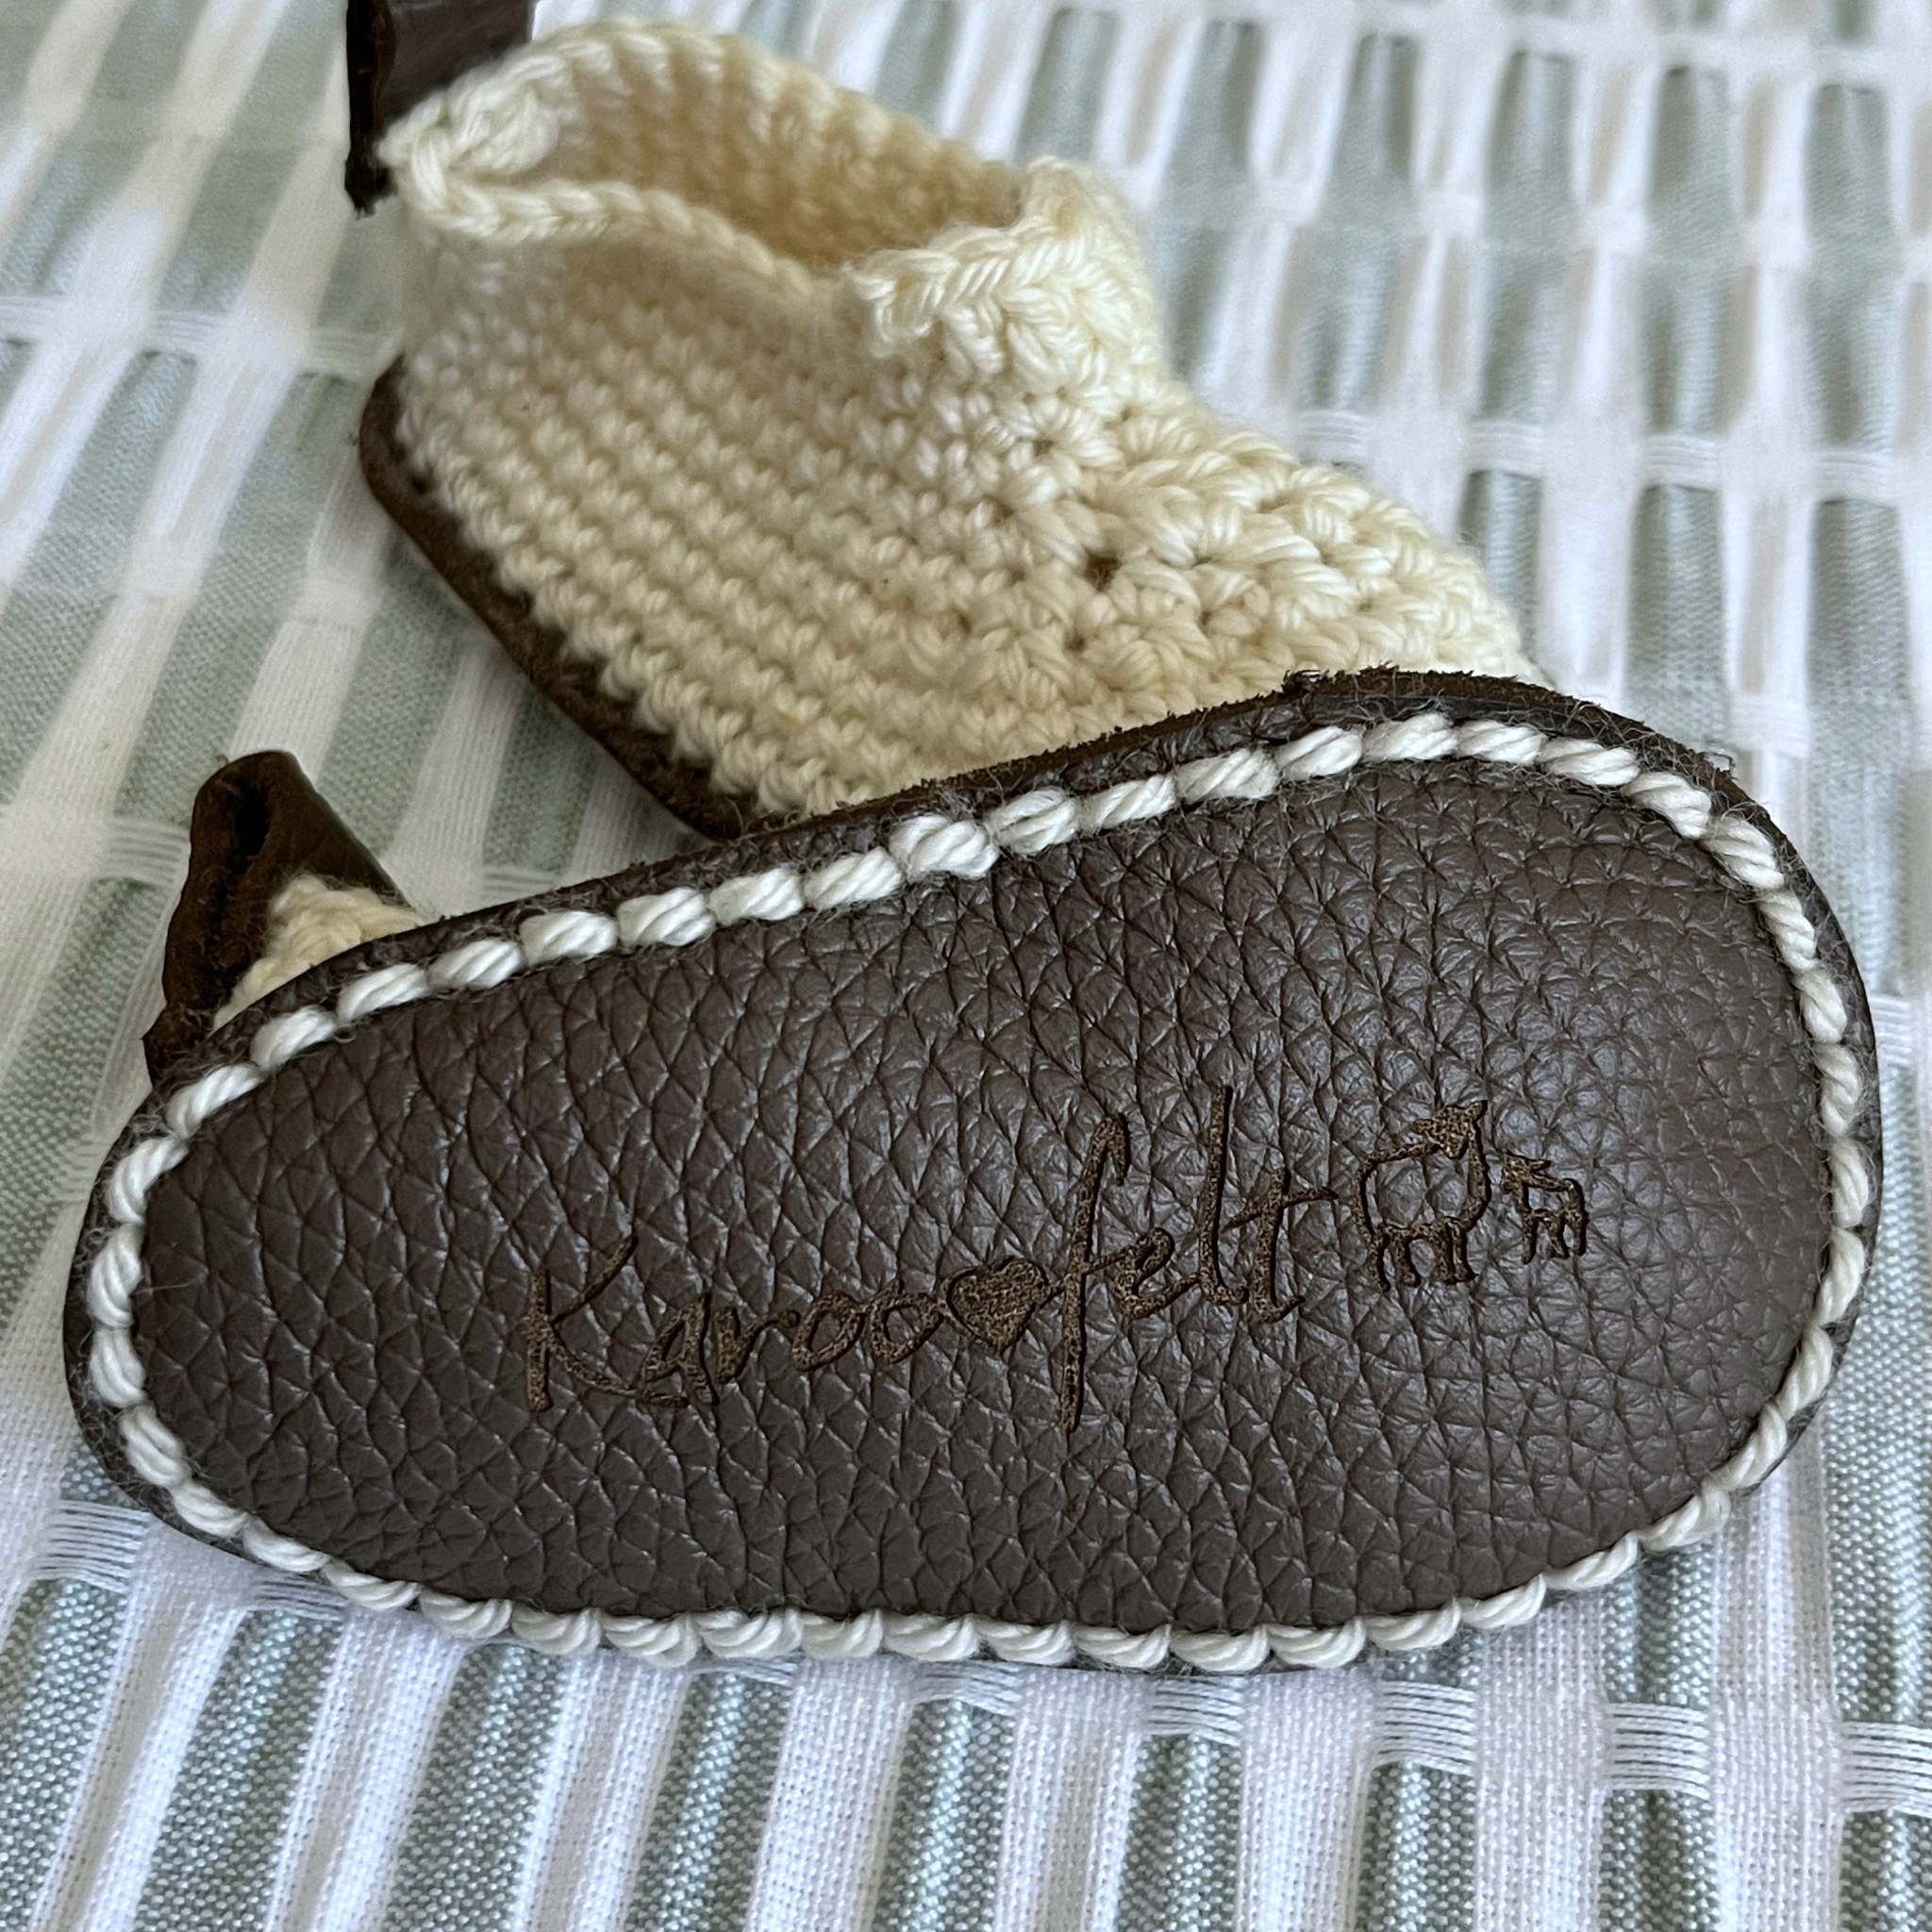 White Baby Booties - 3-6 months - Handicraft Soul